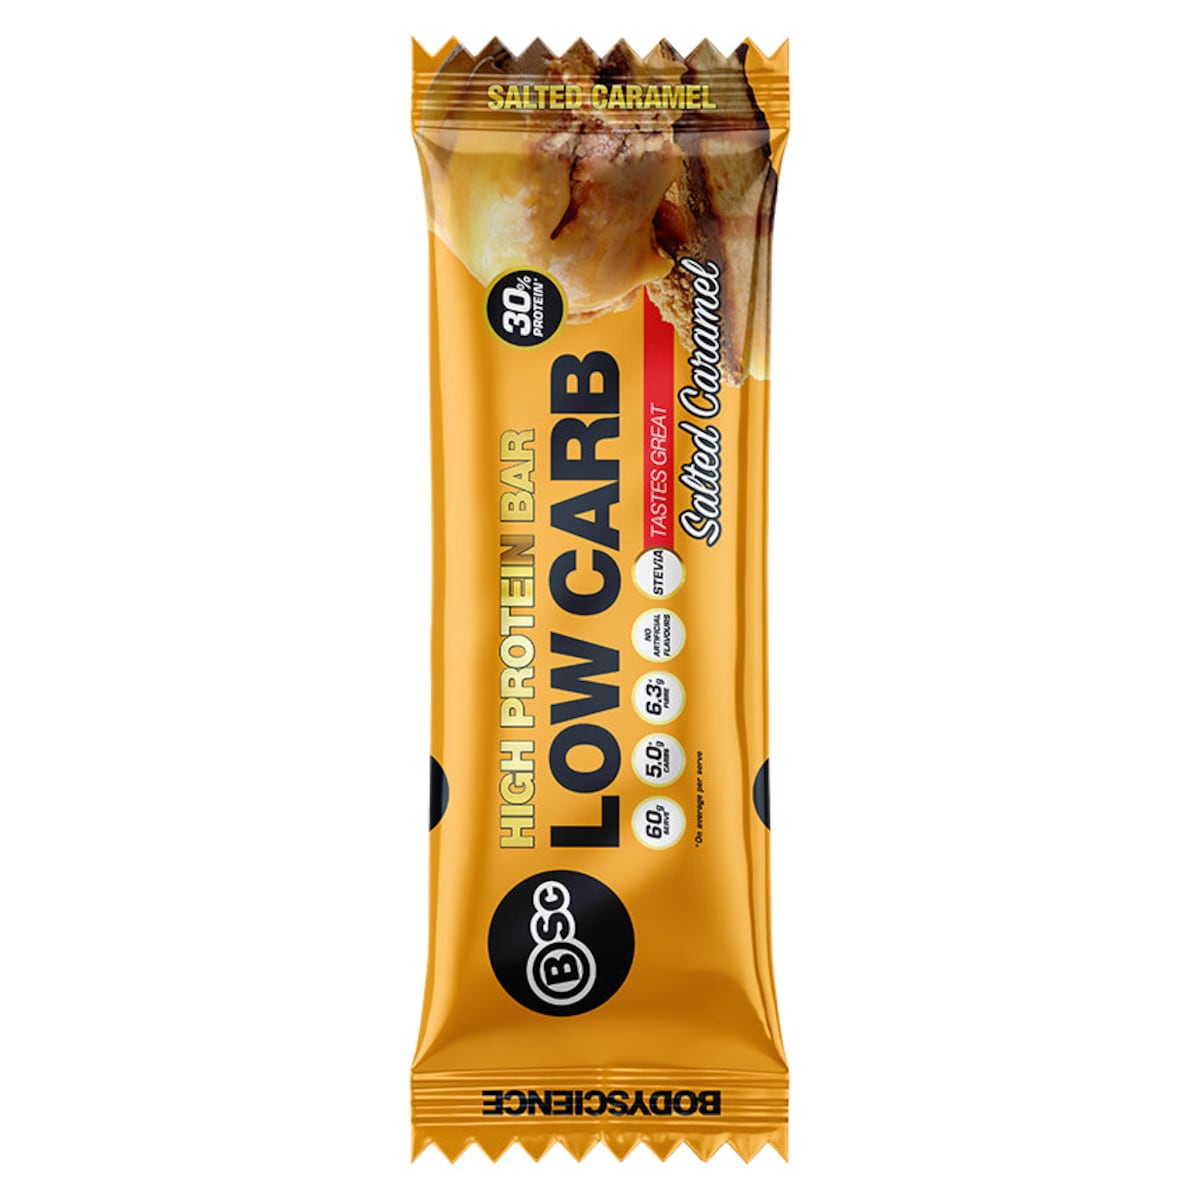 BSc Body Science High Protein Low Carb Bar Salted Caramel 12 x 60g